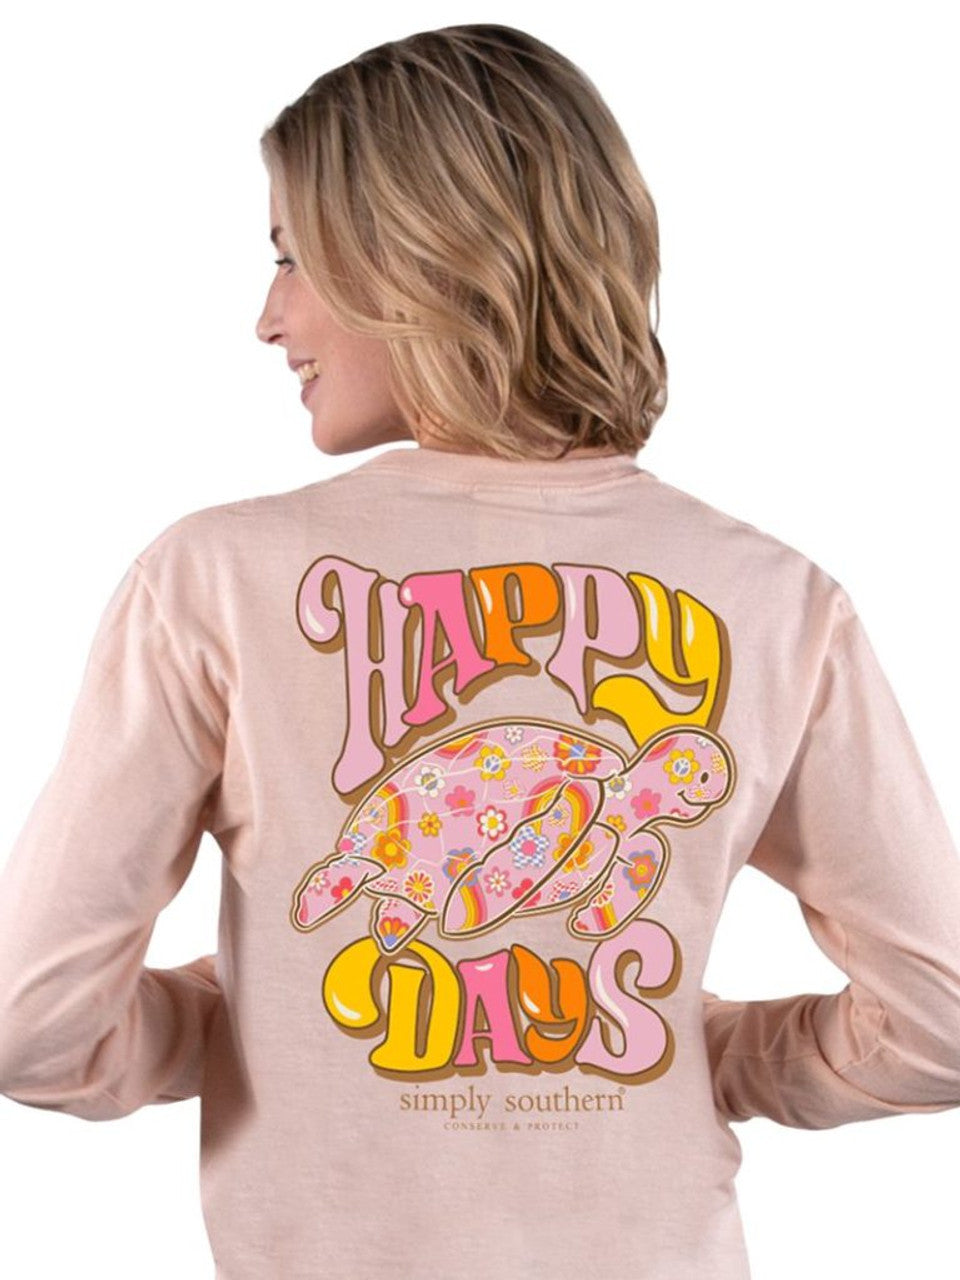 “Happy Days" Long Sleeve Turtle Tracking Tee by Simply Southern